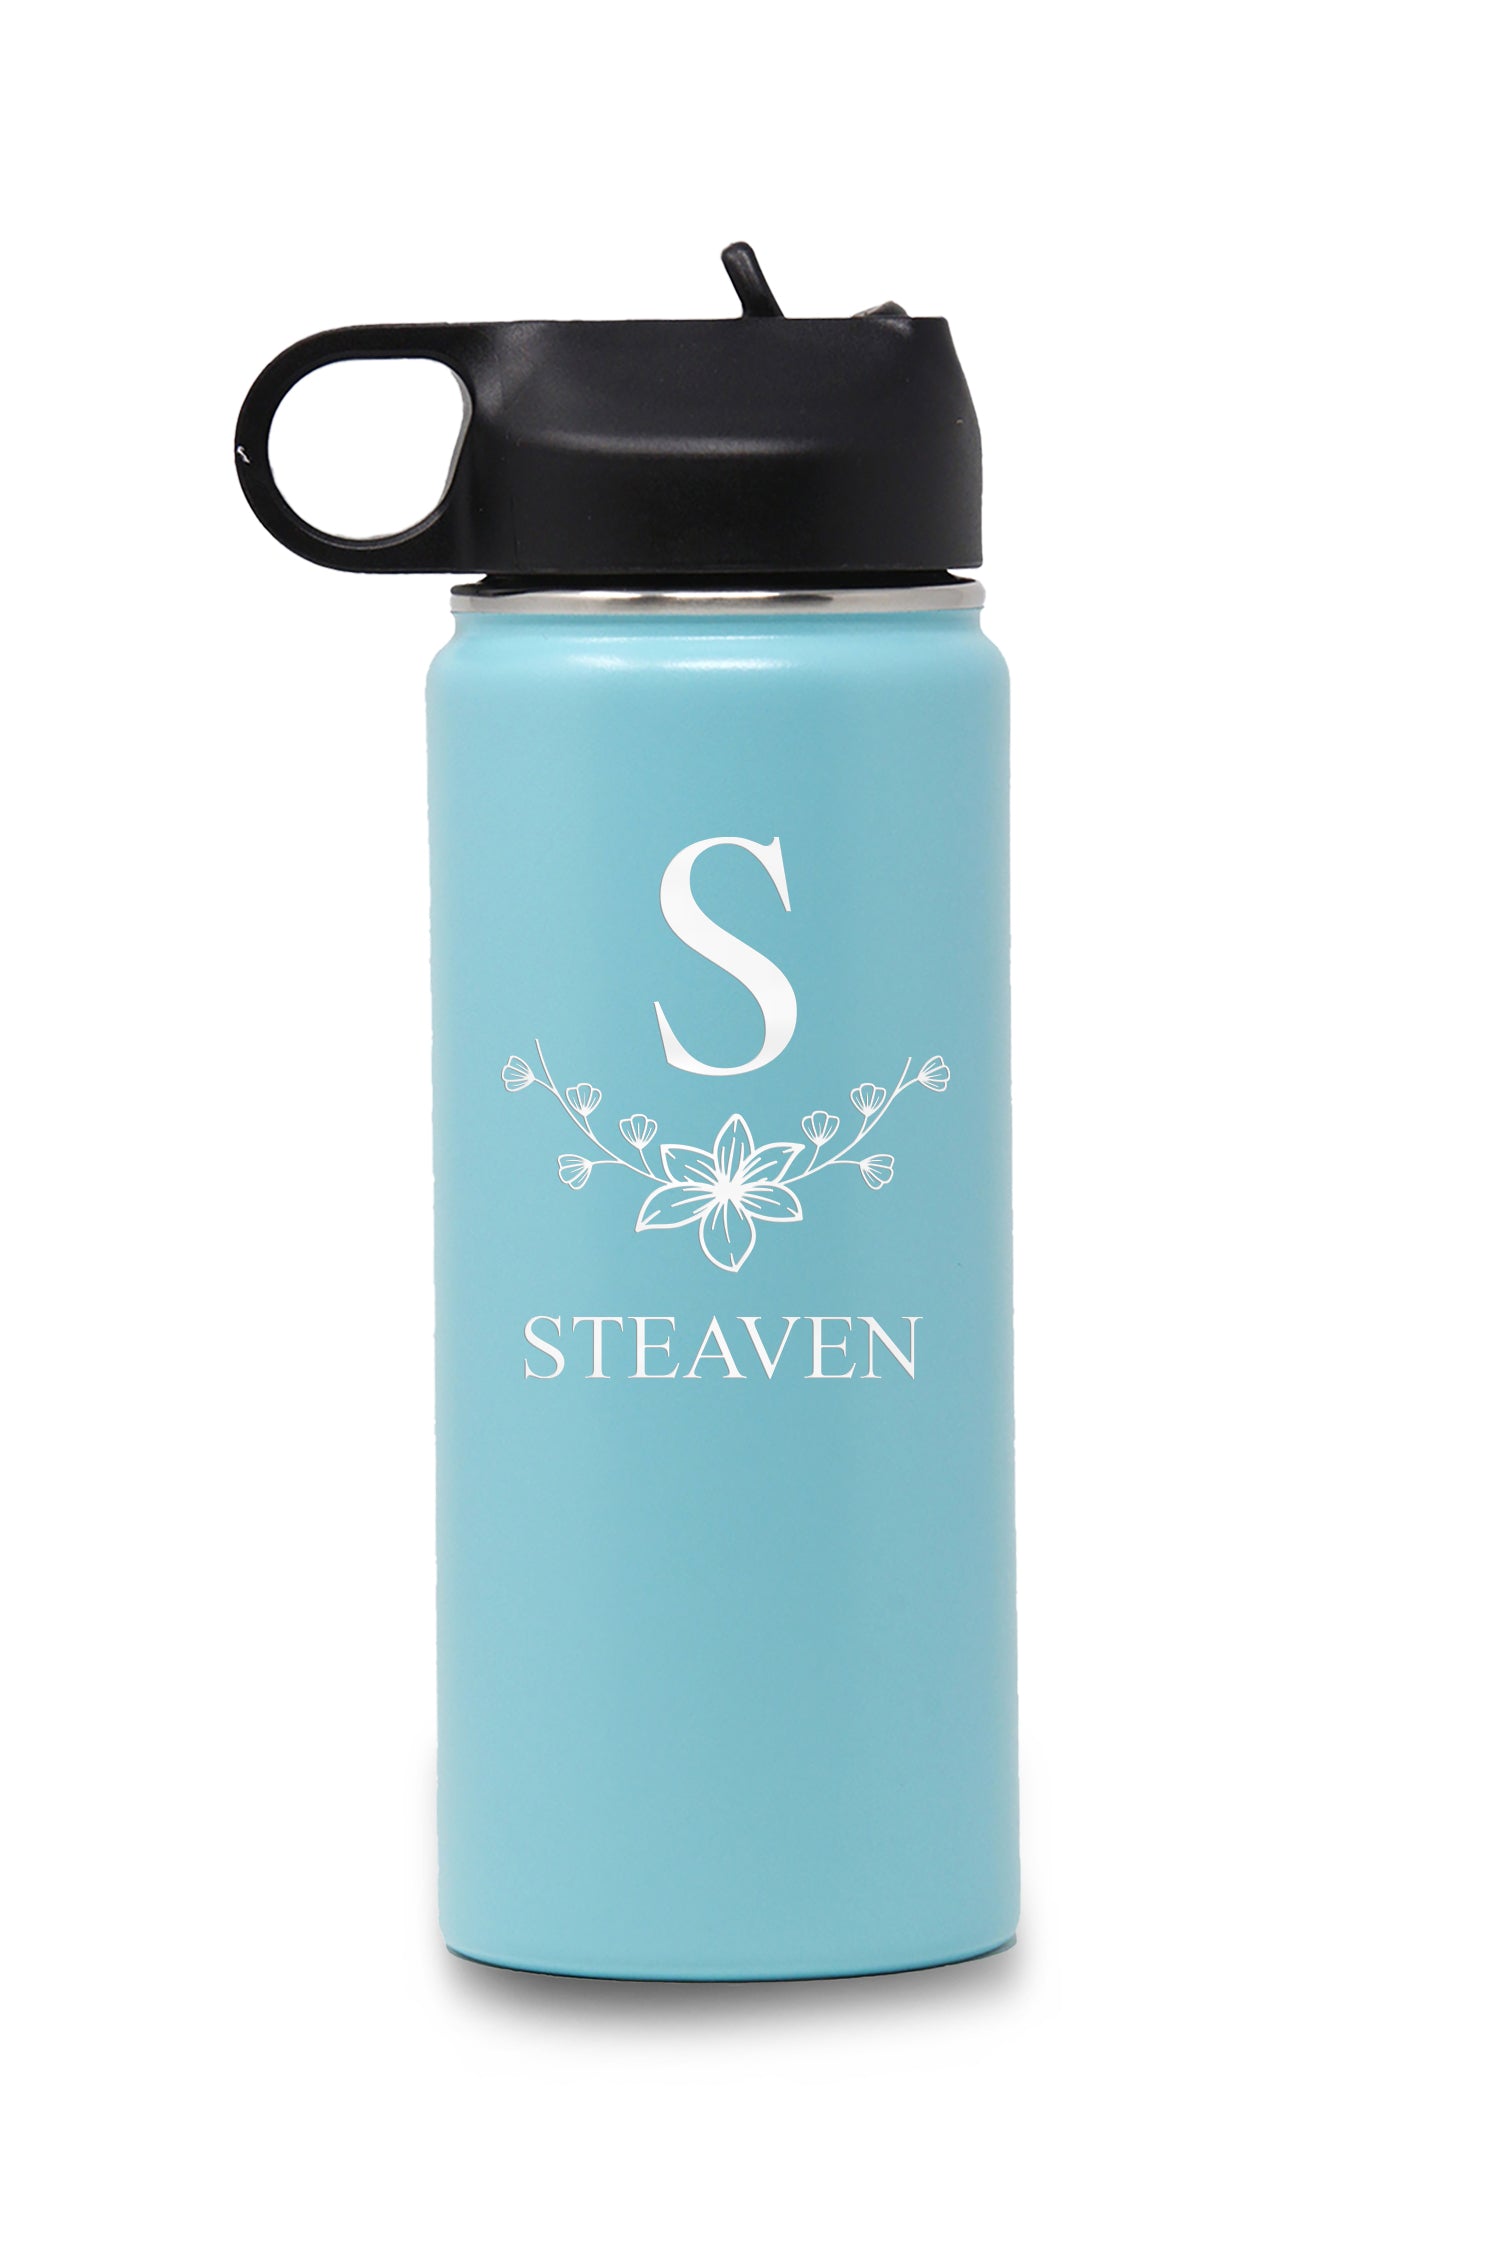 18oz Floral Flower Monogram Water Bottle with Lid and Straw, Insulated Stainless Steel Sports Water Bottle Double Wall Vacuum Insulated Gift Cup